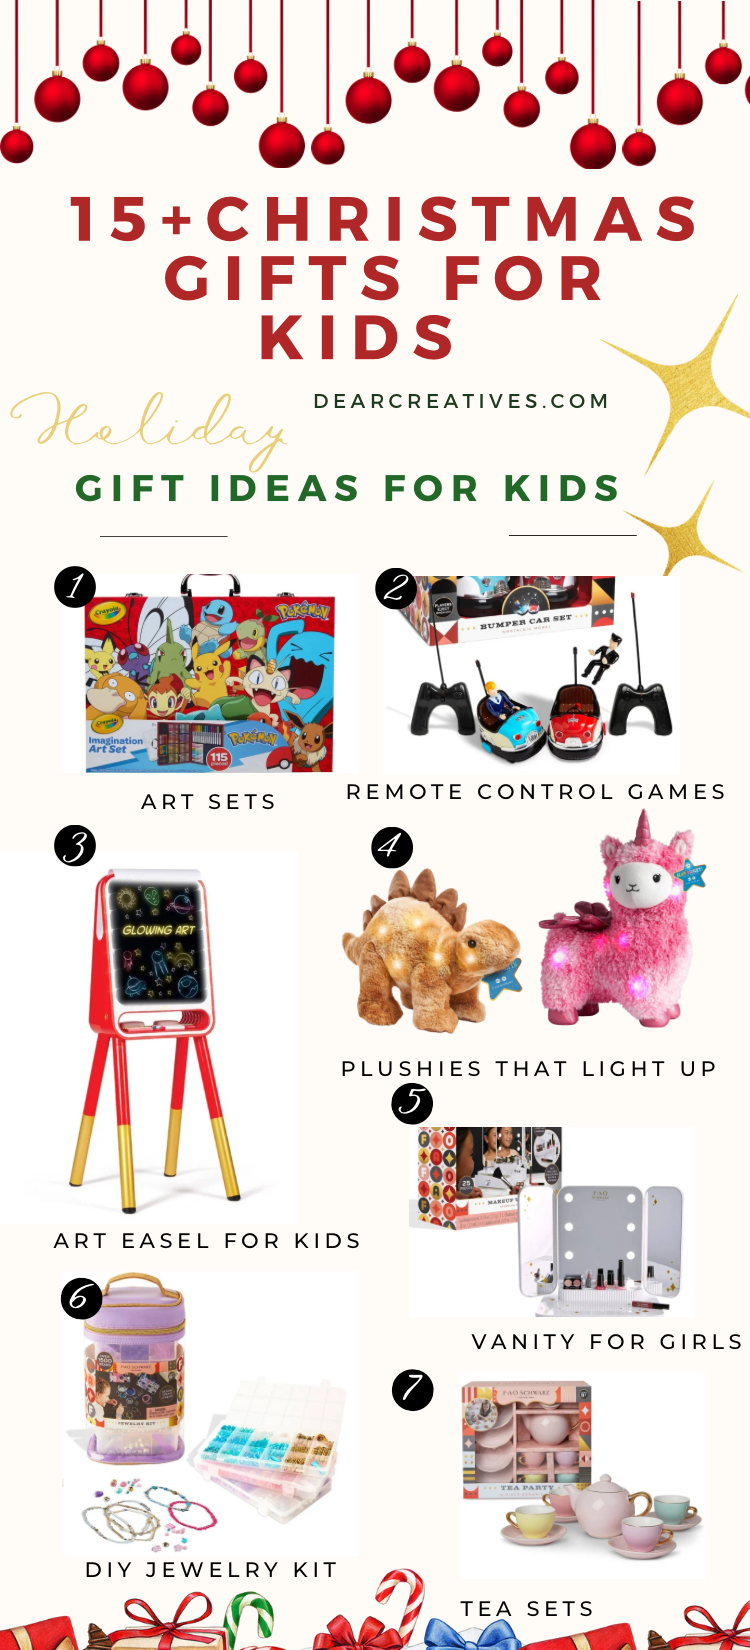 Christmas Gifts For Kids 15+ Gifts They'll Love Receiving! - Dear Creatives